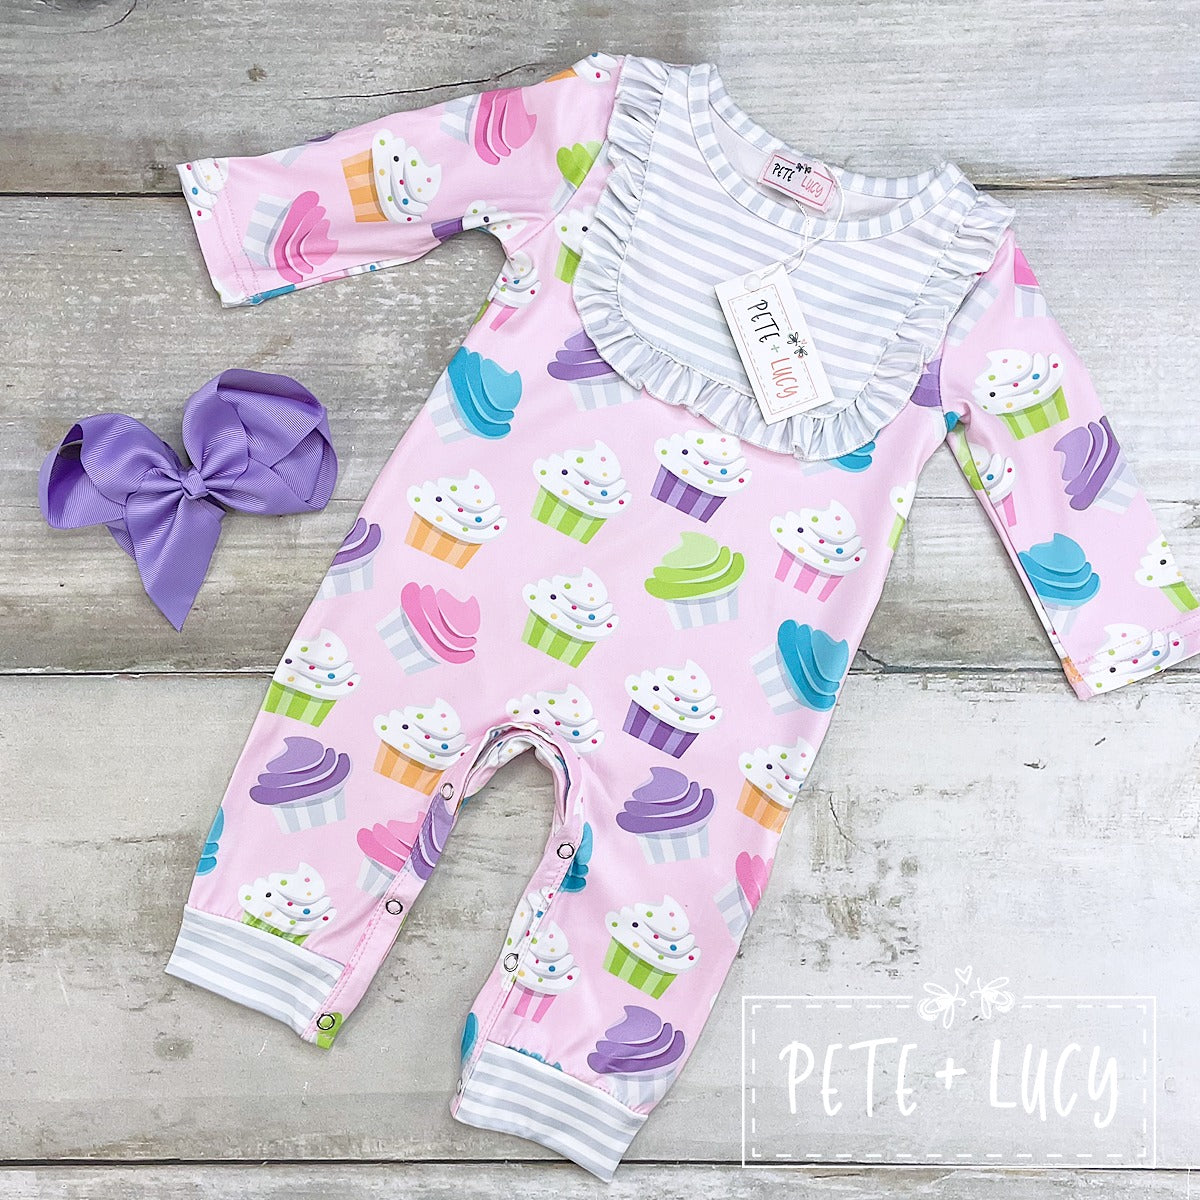 Serendipity's Closet Pete + Lucy Sweet Dreams Infant Girls' Romper